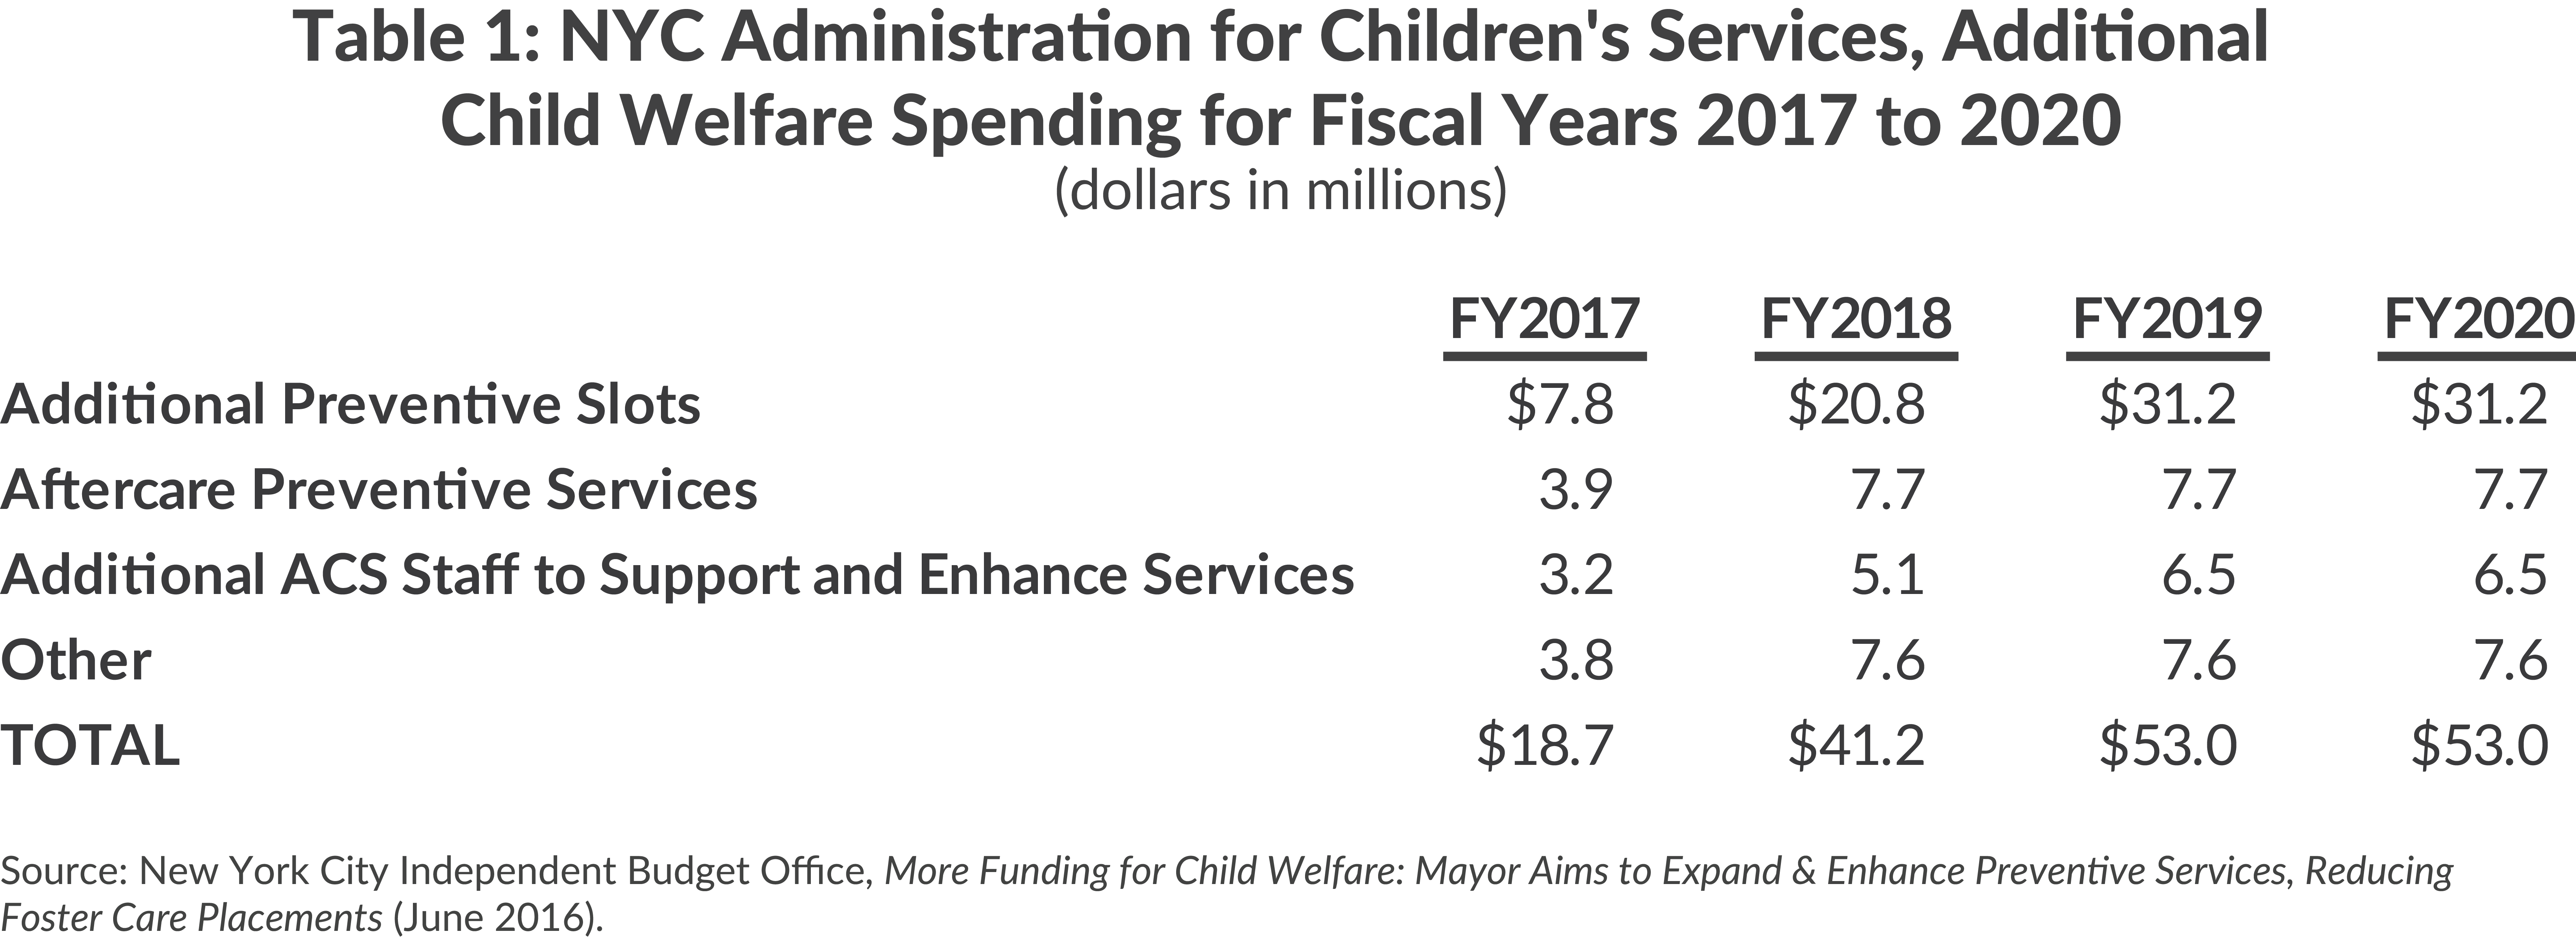 Table 1: NYC Administration for Children's Services, AdditionalChild Welfare Spending for Fiscal Years 2017 to 2020